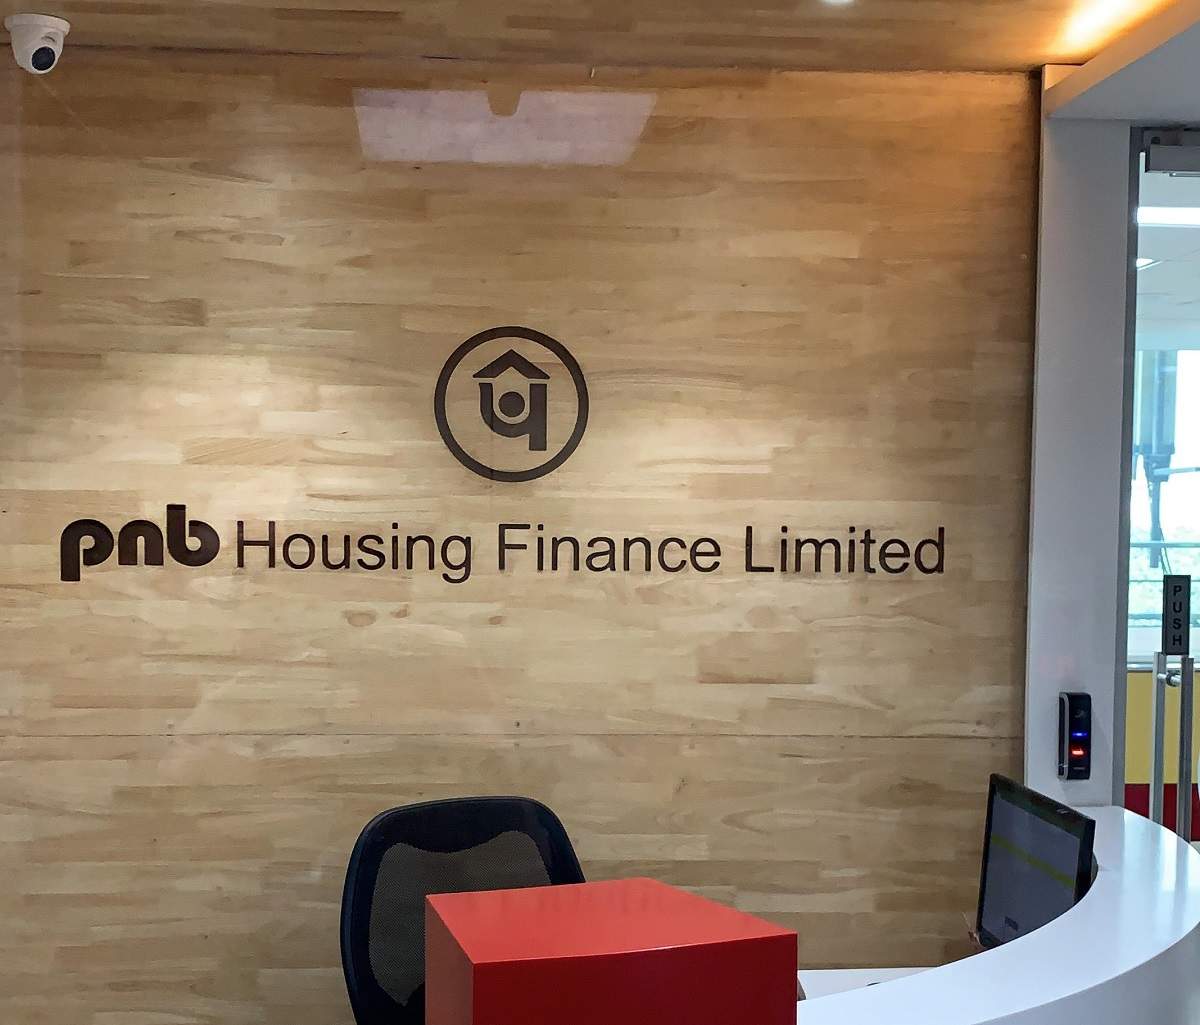 PNB Housing says pricing for Rs 4,000 crore-deal in line with applicable law